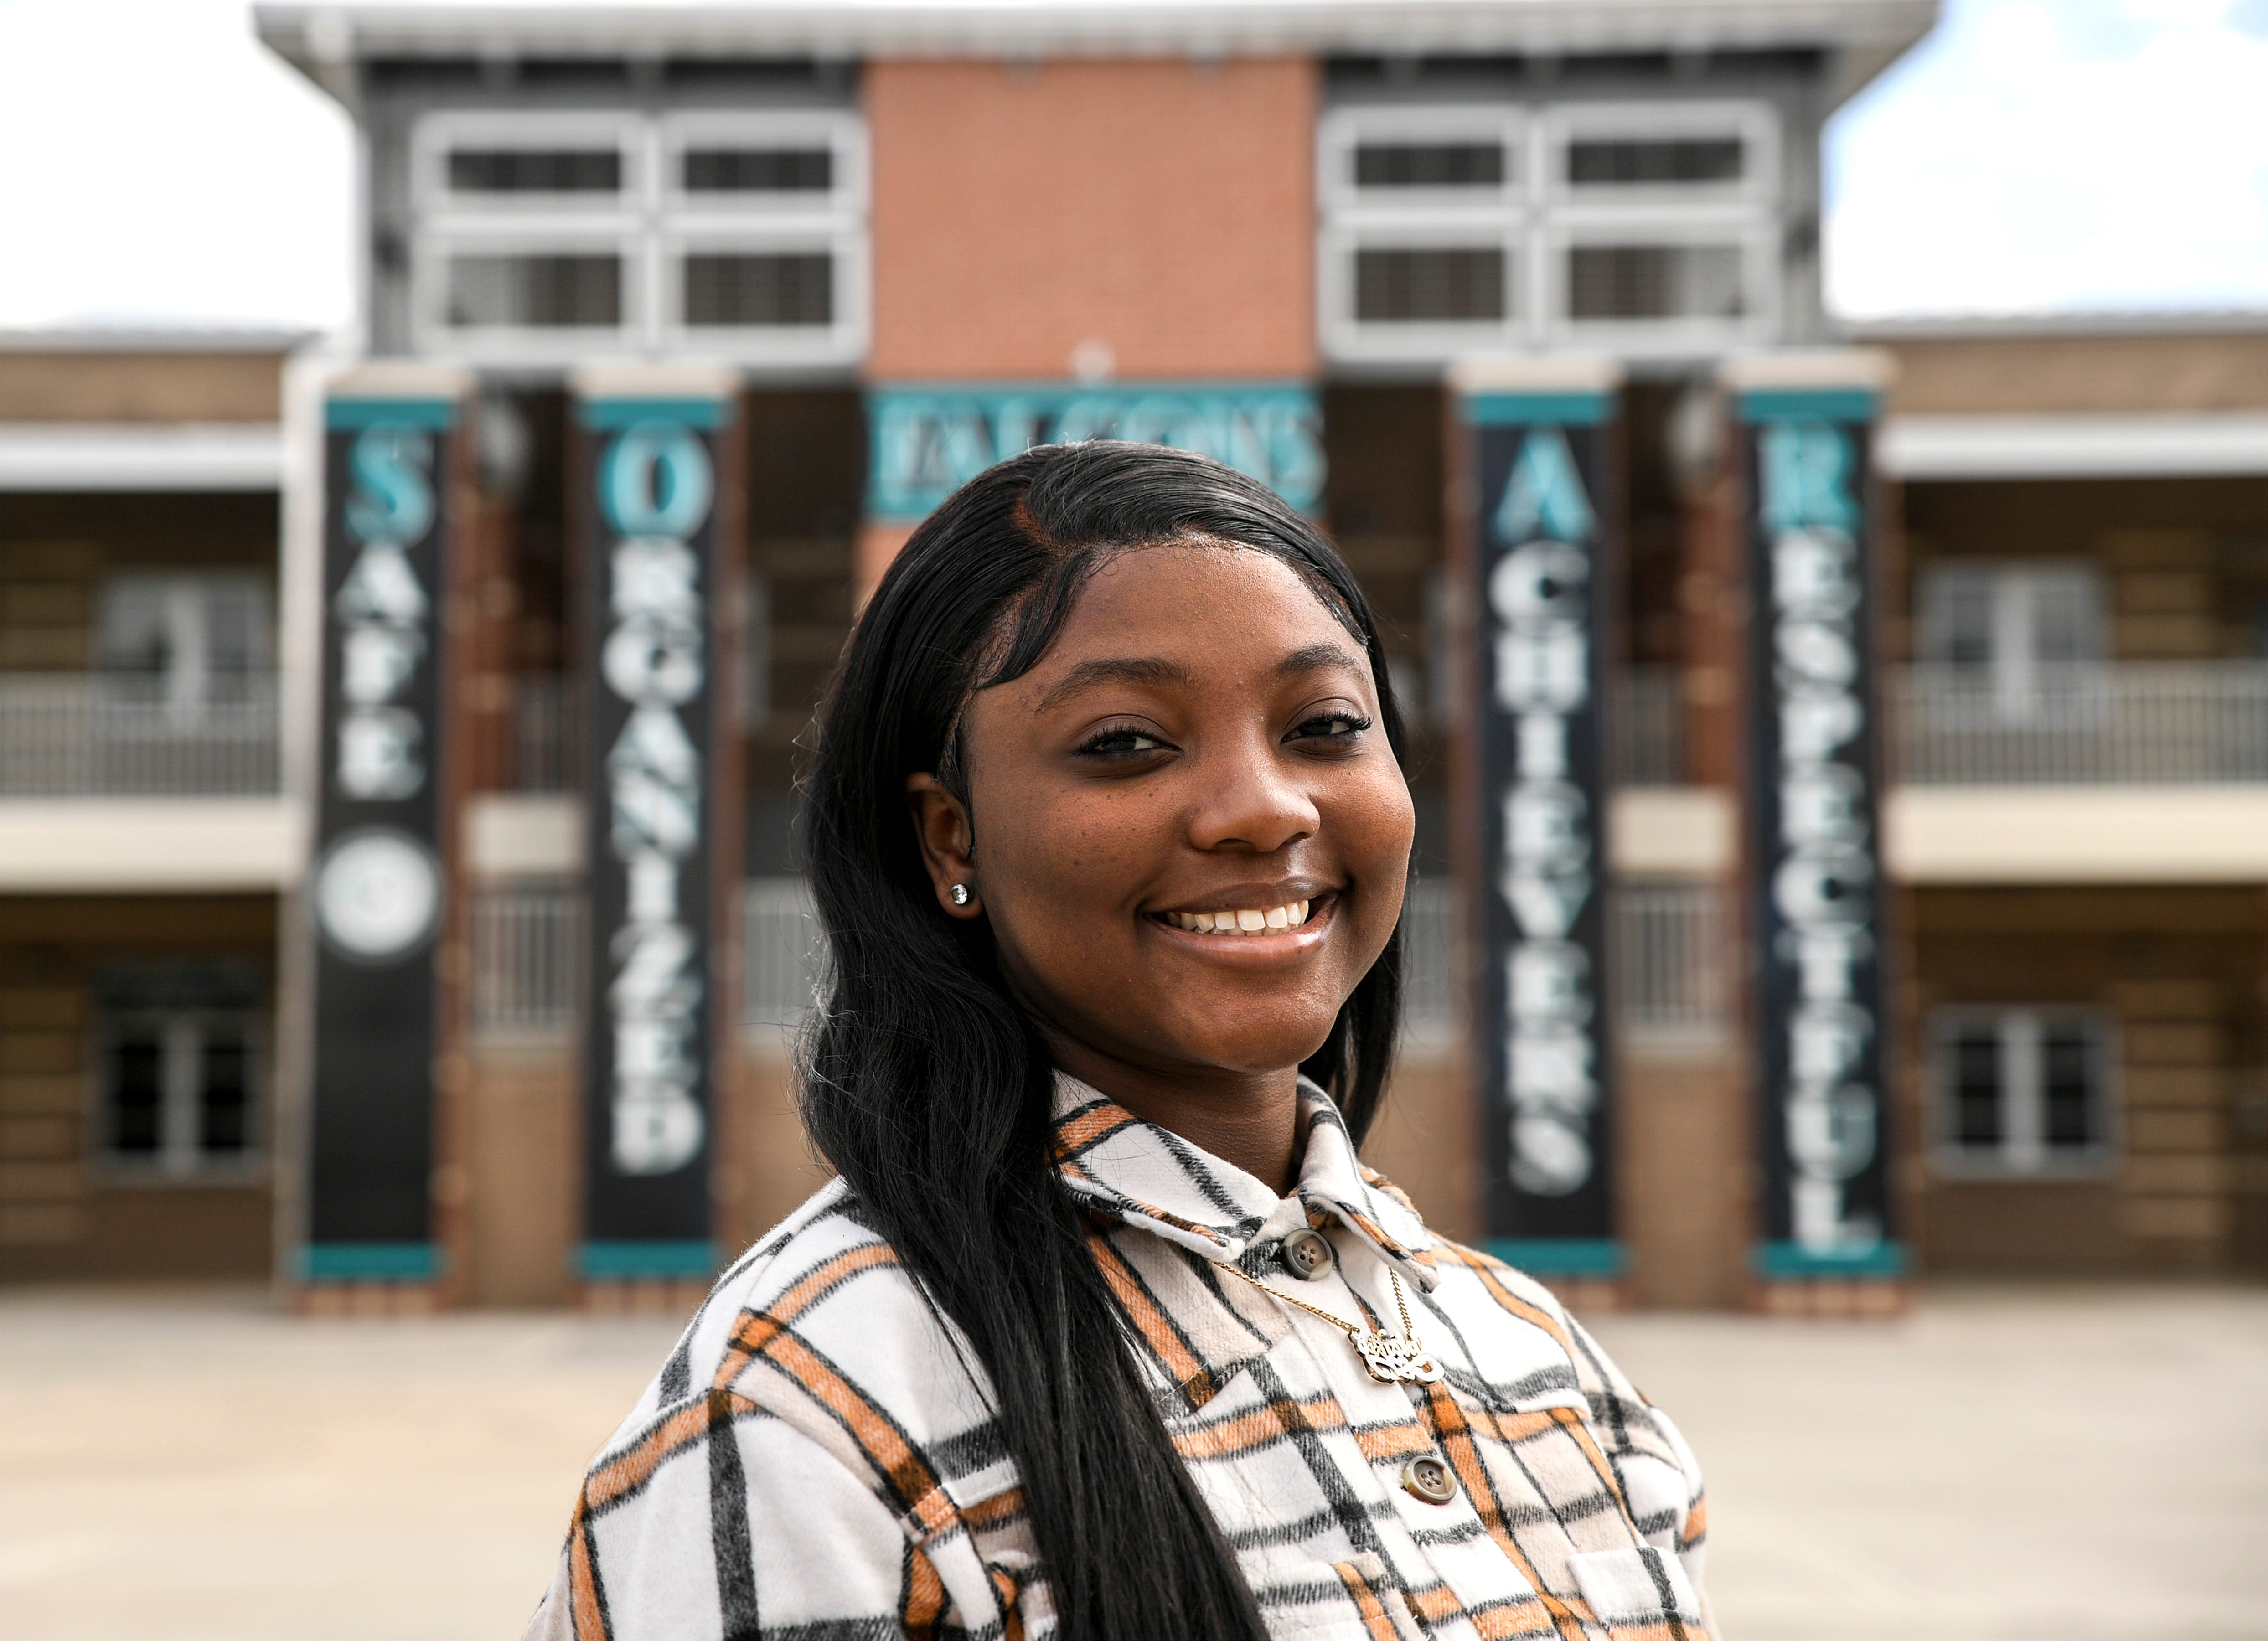 "For me for COVID, it was hard in the beginning. I had the mindset that I wanted to actually finish high school with good grades and everything," said Ja'Asia Davis. "So even though I didn't come to school as much, I still found time at home so I could focus and get the good grades that I want, like having just straight A's and B's,  and not fail during COVID."